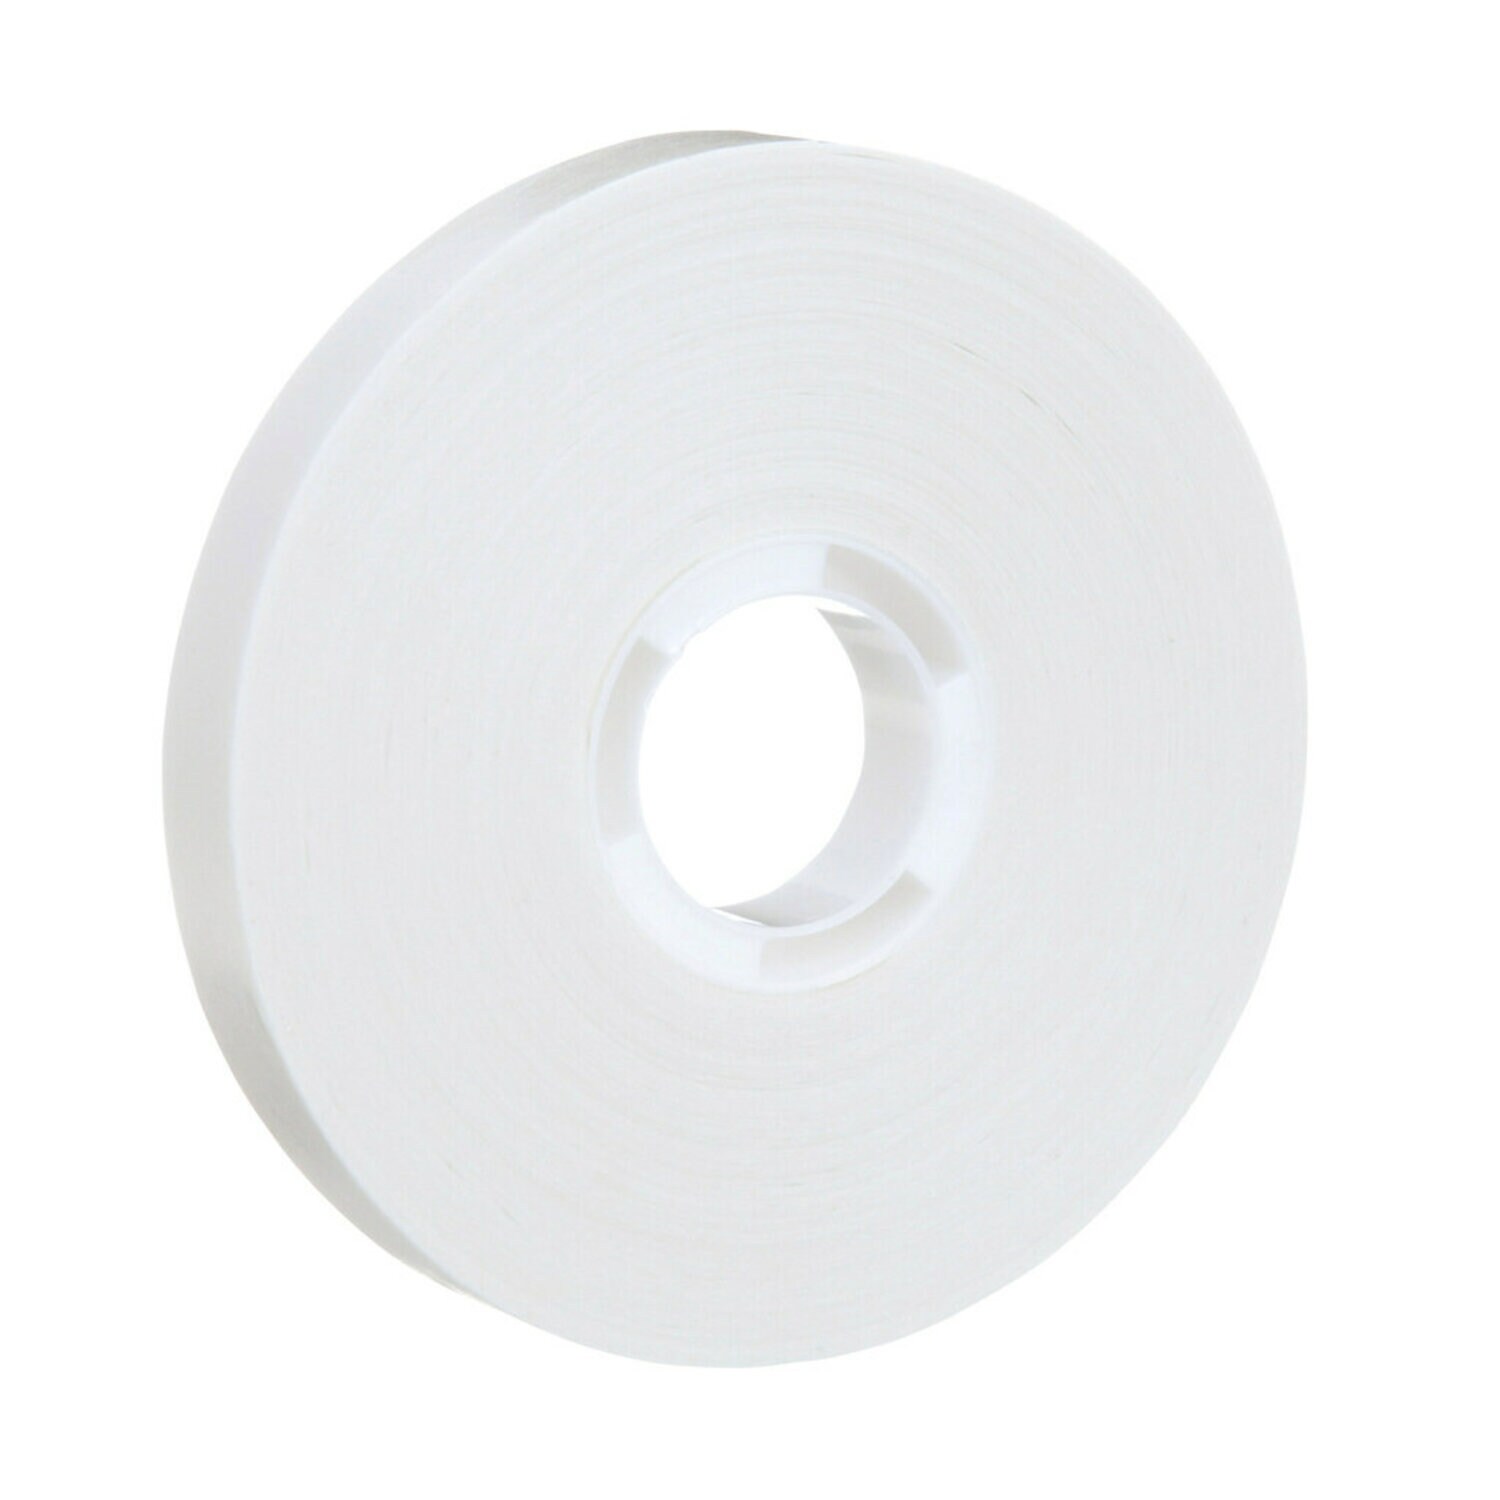 7100016838 - Scotch ATG Repositionable Double Coated Tissue Tape 928, Translucent
White, 1/2 in x 36 yd, 2 mil, 12 rolls/inner, 6 inners/case